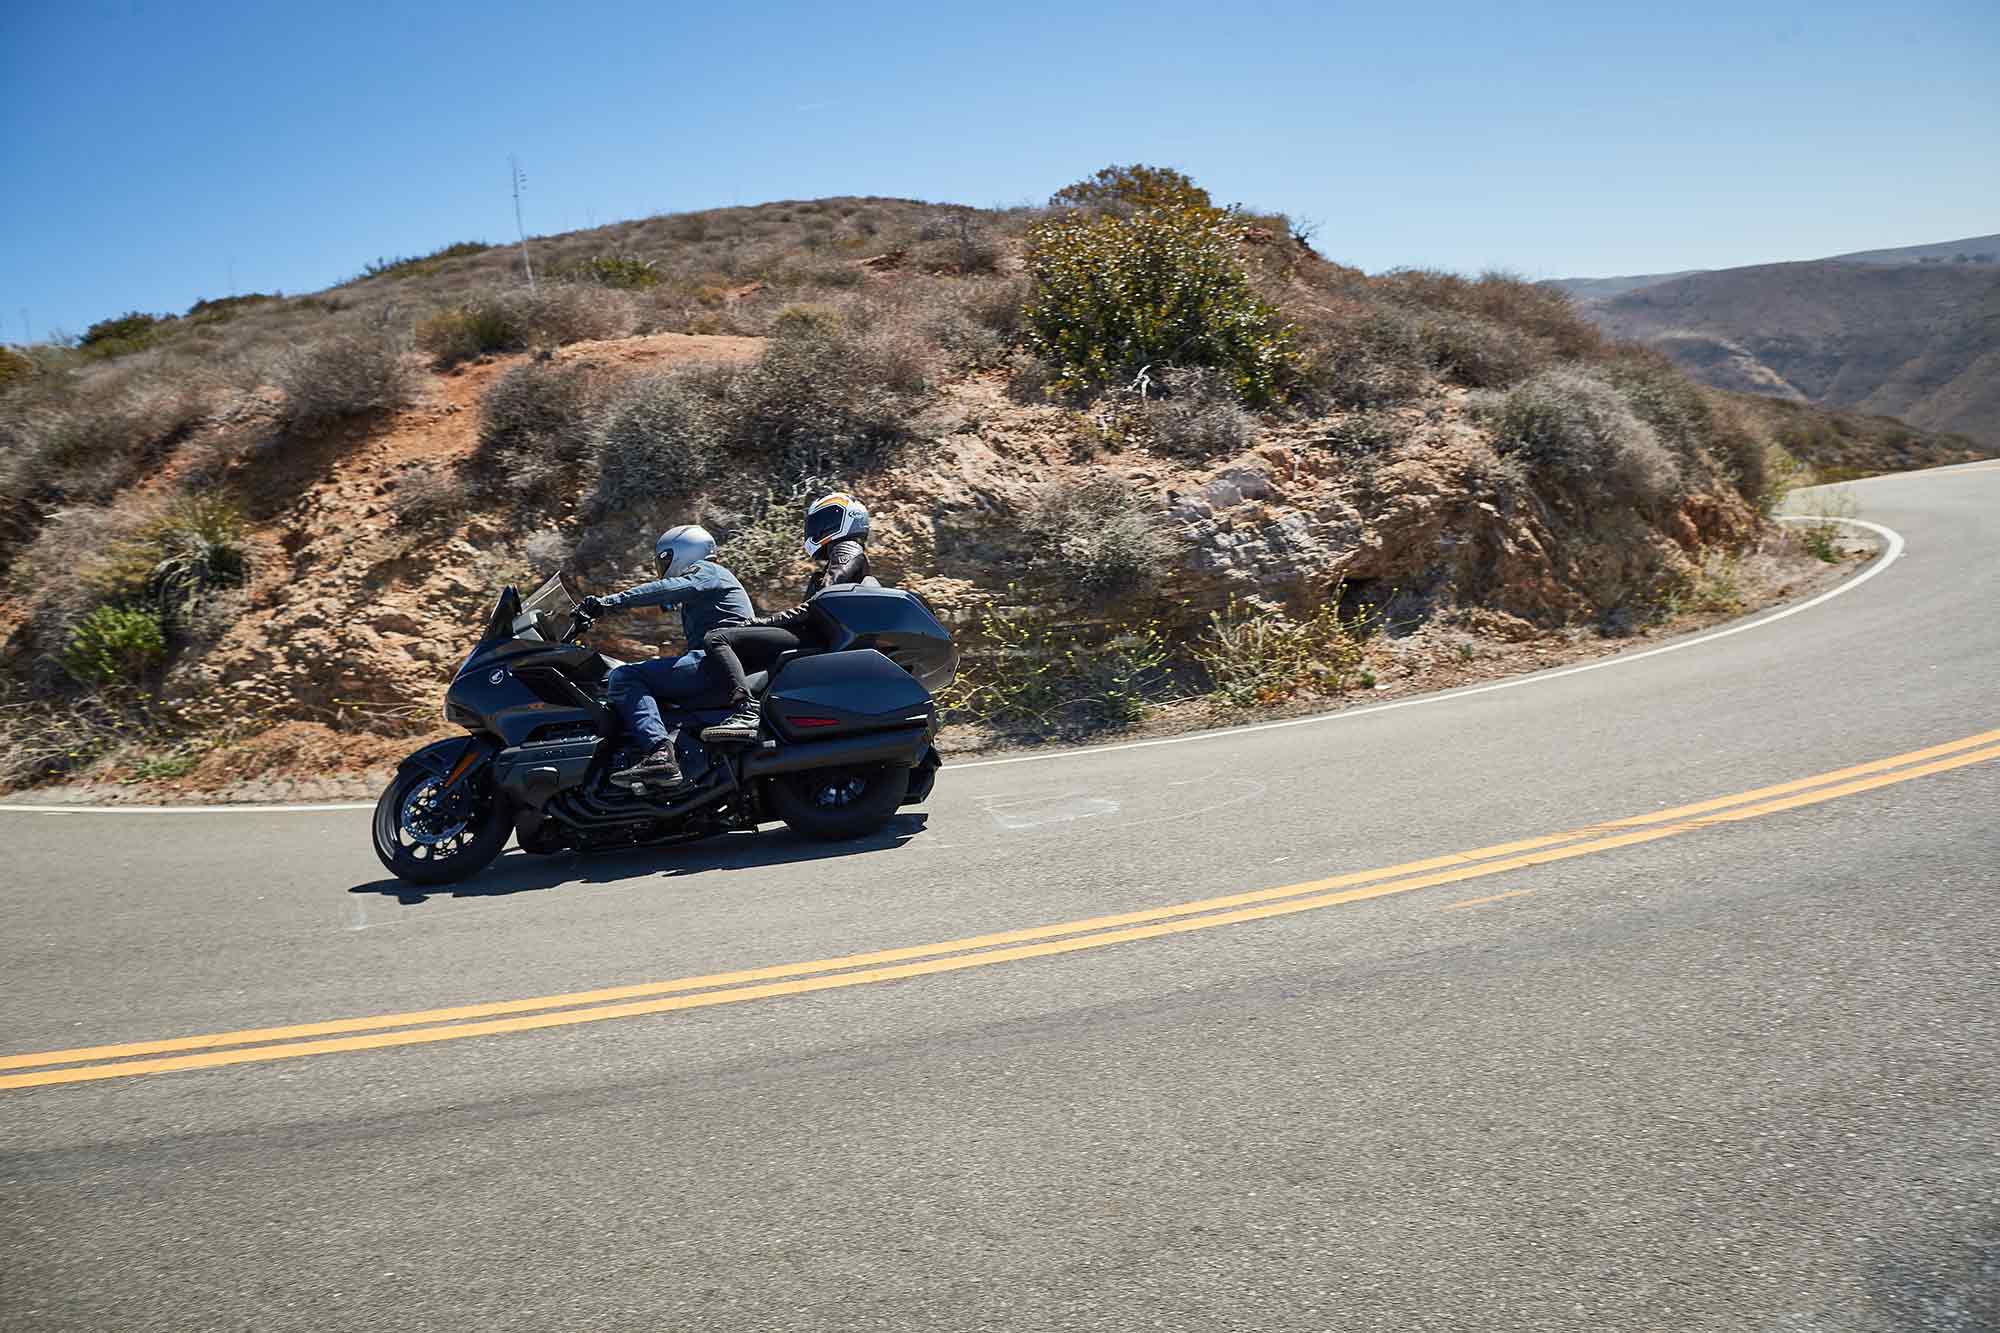 Despite weighing 839 pounds with a full tank of fuel, the Gold Wing feels 100s of pounds lighter with wheels in motion.